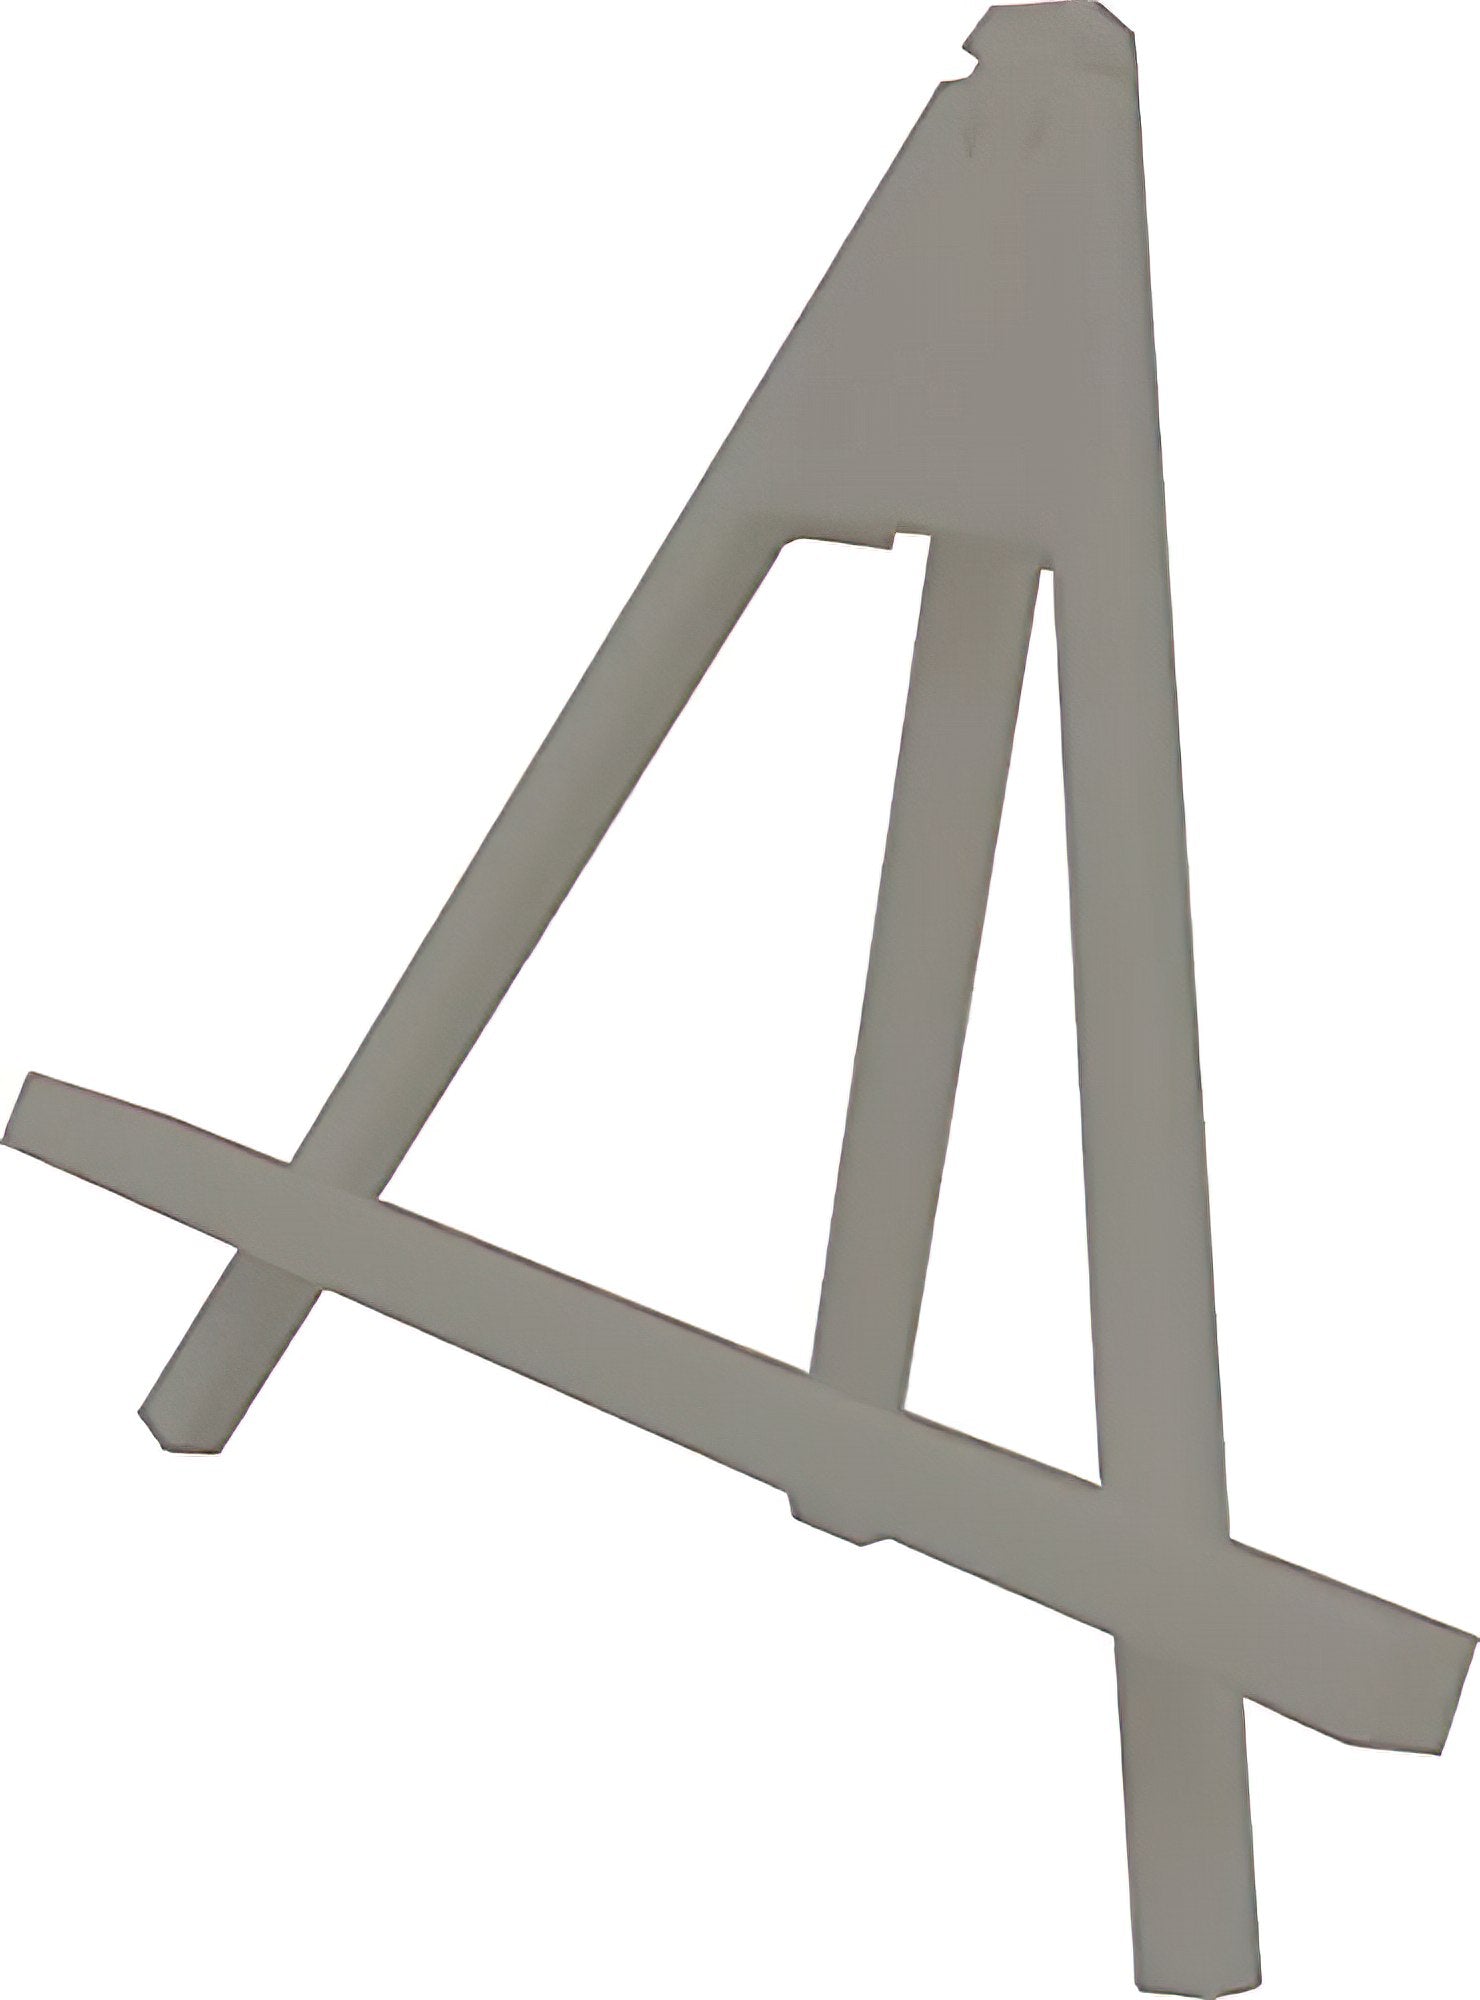 Ensky • Accessories • Artboard Jigsaw Easel Stand / Grey　Puzzle Stand